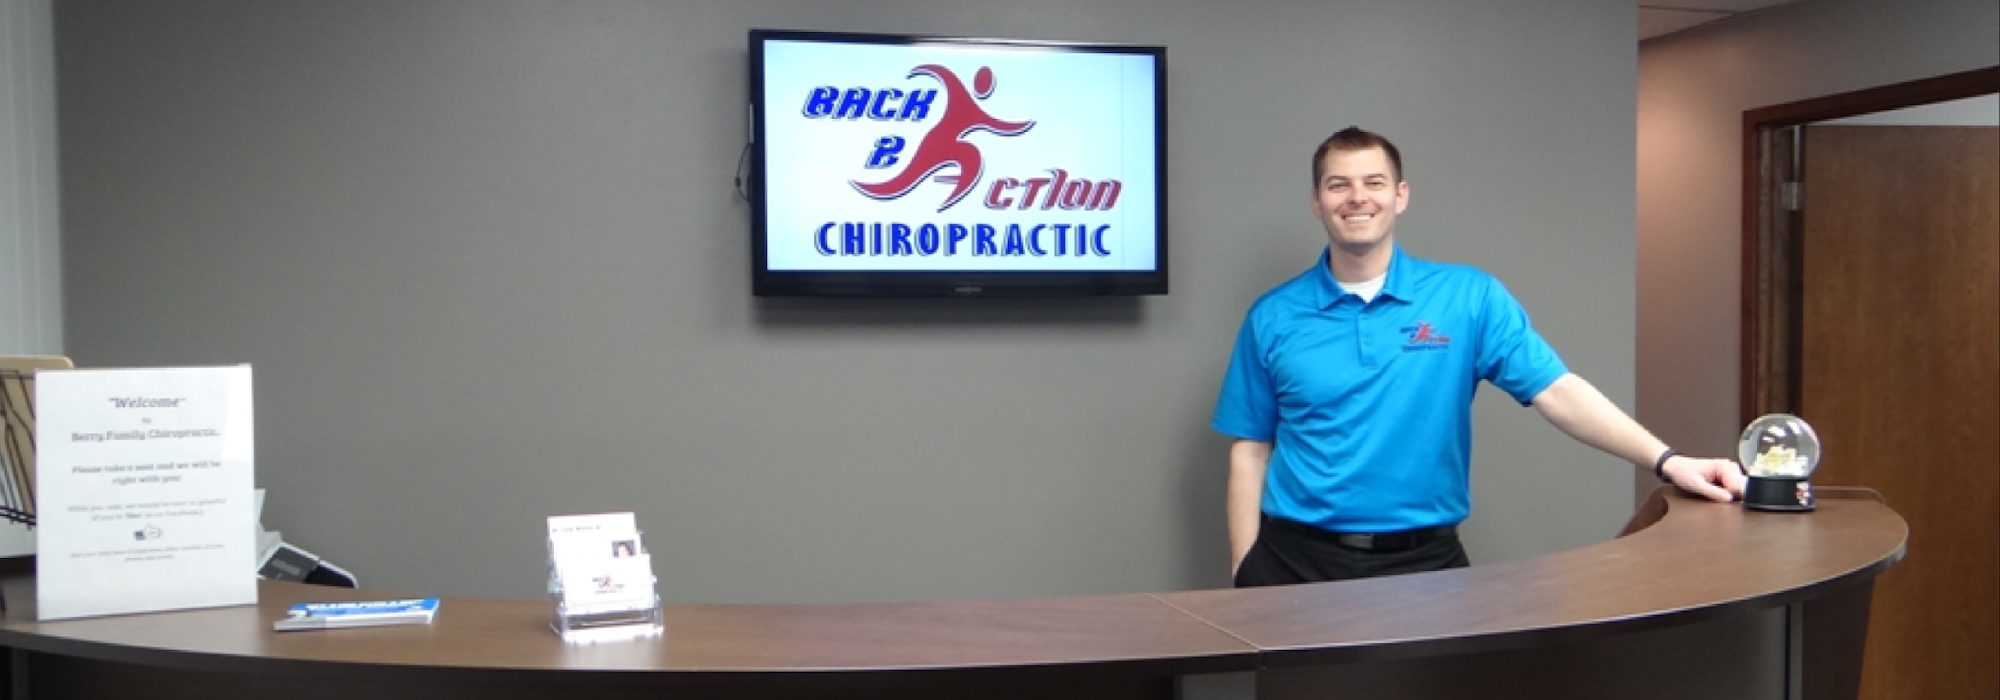 Back 2 Action Chiropractic